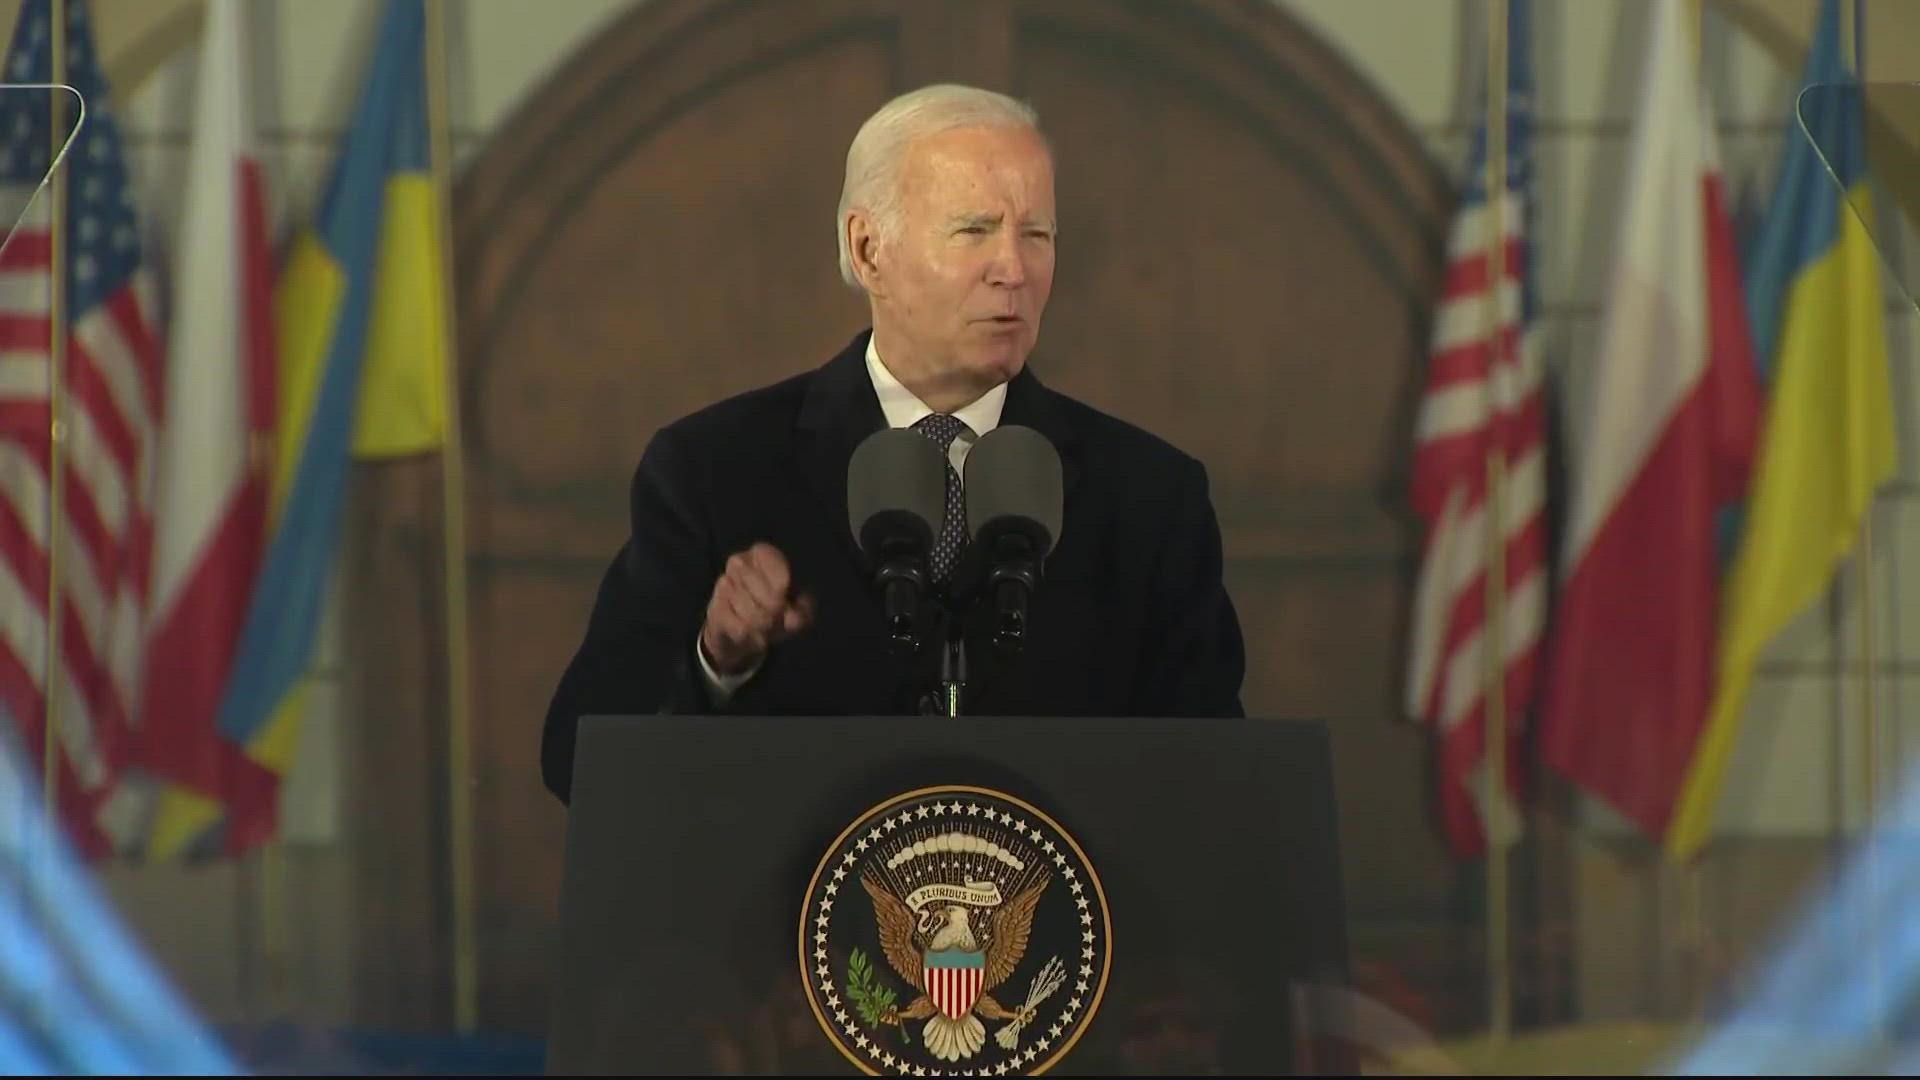 Biden's speech comes just after Russian President Vladimir Putin announced Moscow would suspend its participation in a nuclear arms control pact with the US.